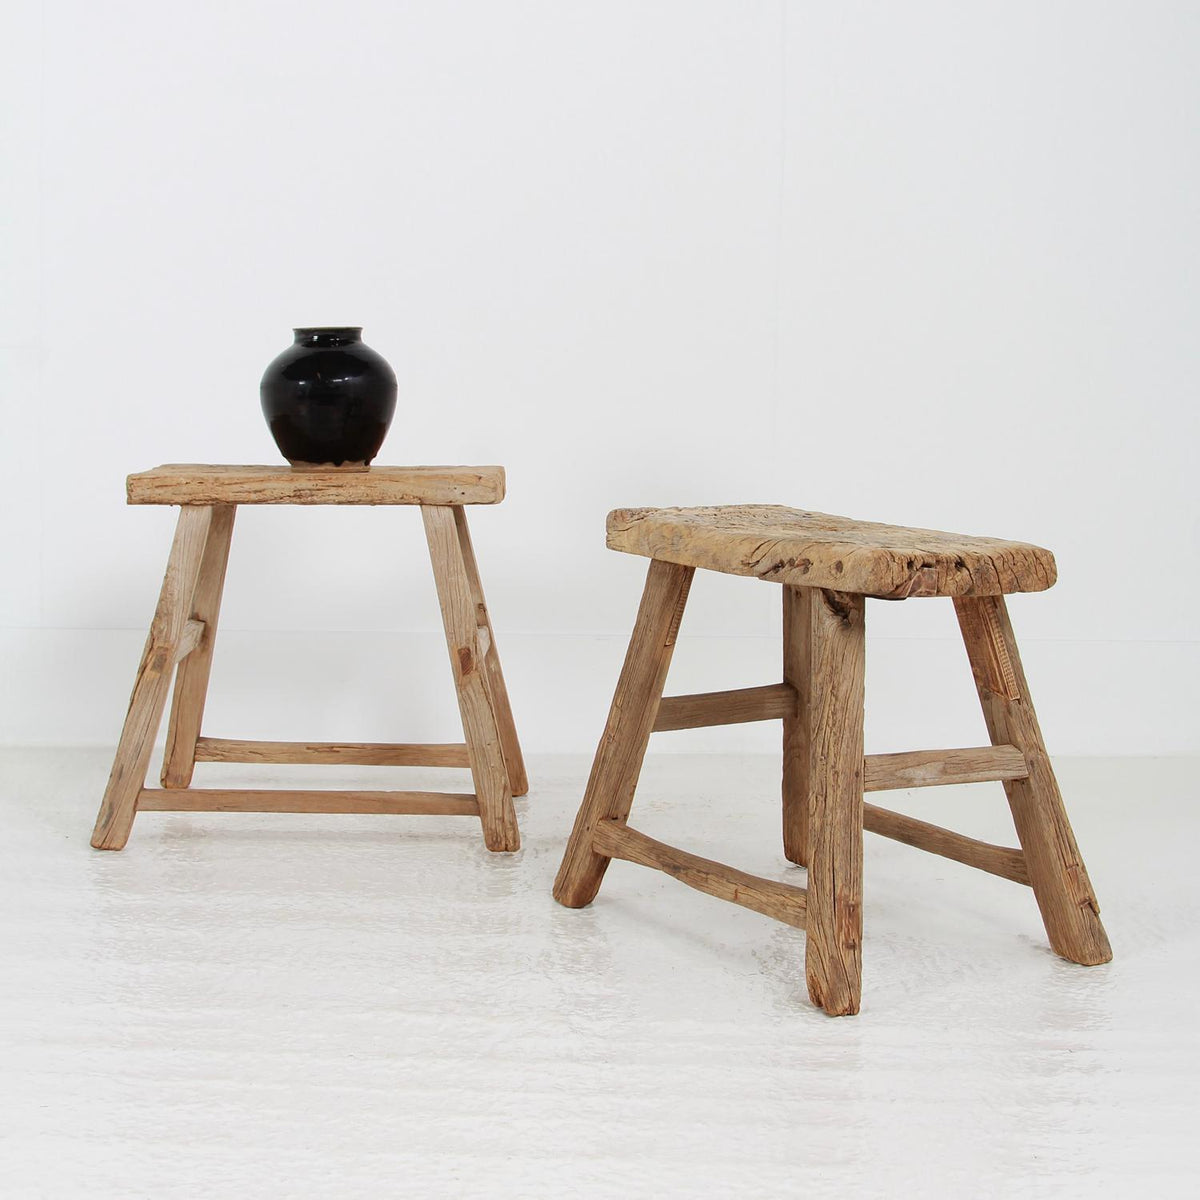 NEAR PAIR OF RUSTIC WABI-SABI CHINESE WORKERS STOOLS OR TABLES